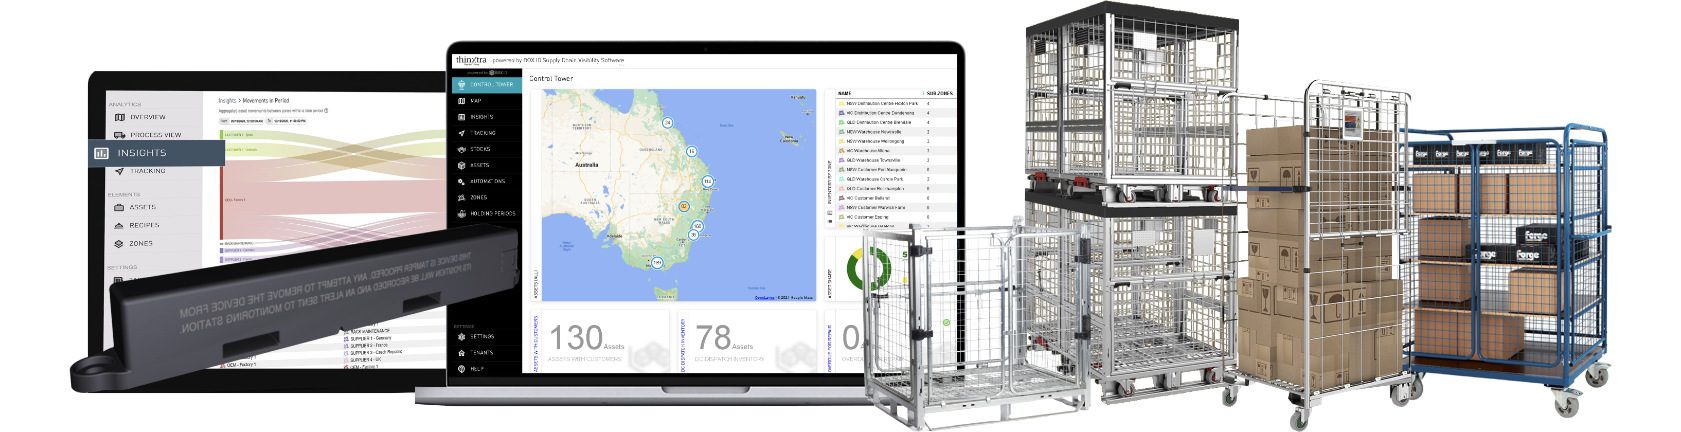 Range of IoT solutions for parcel cage tracking